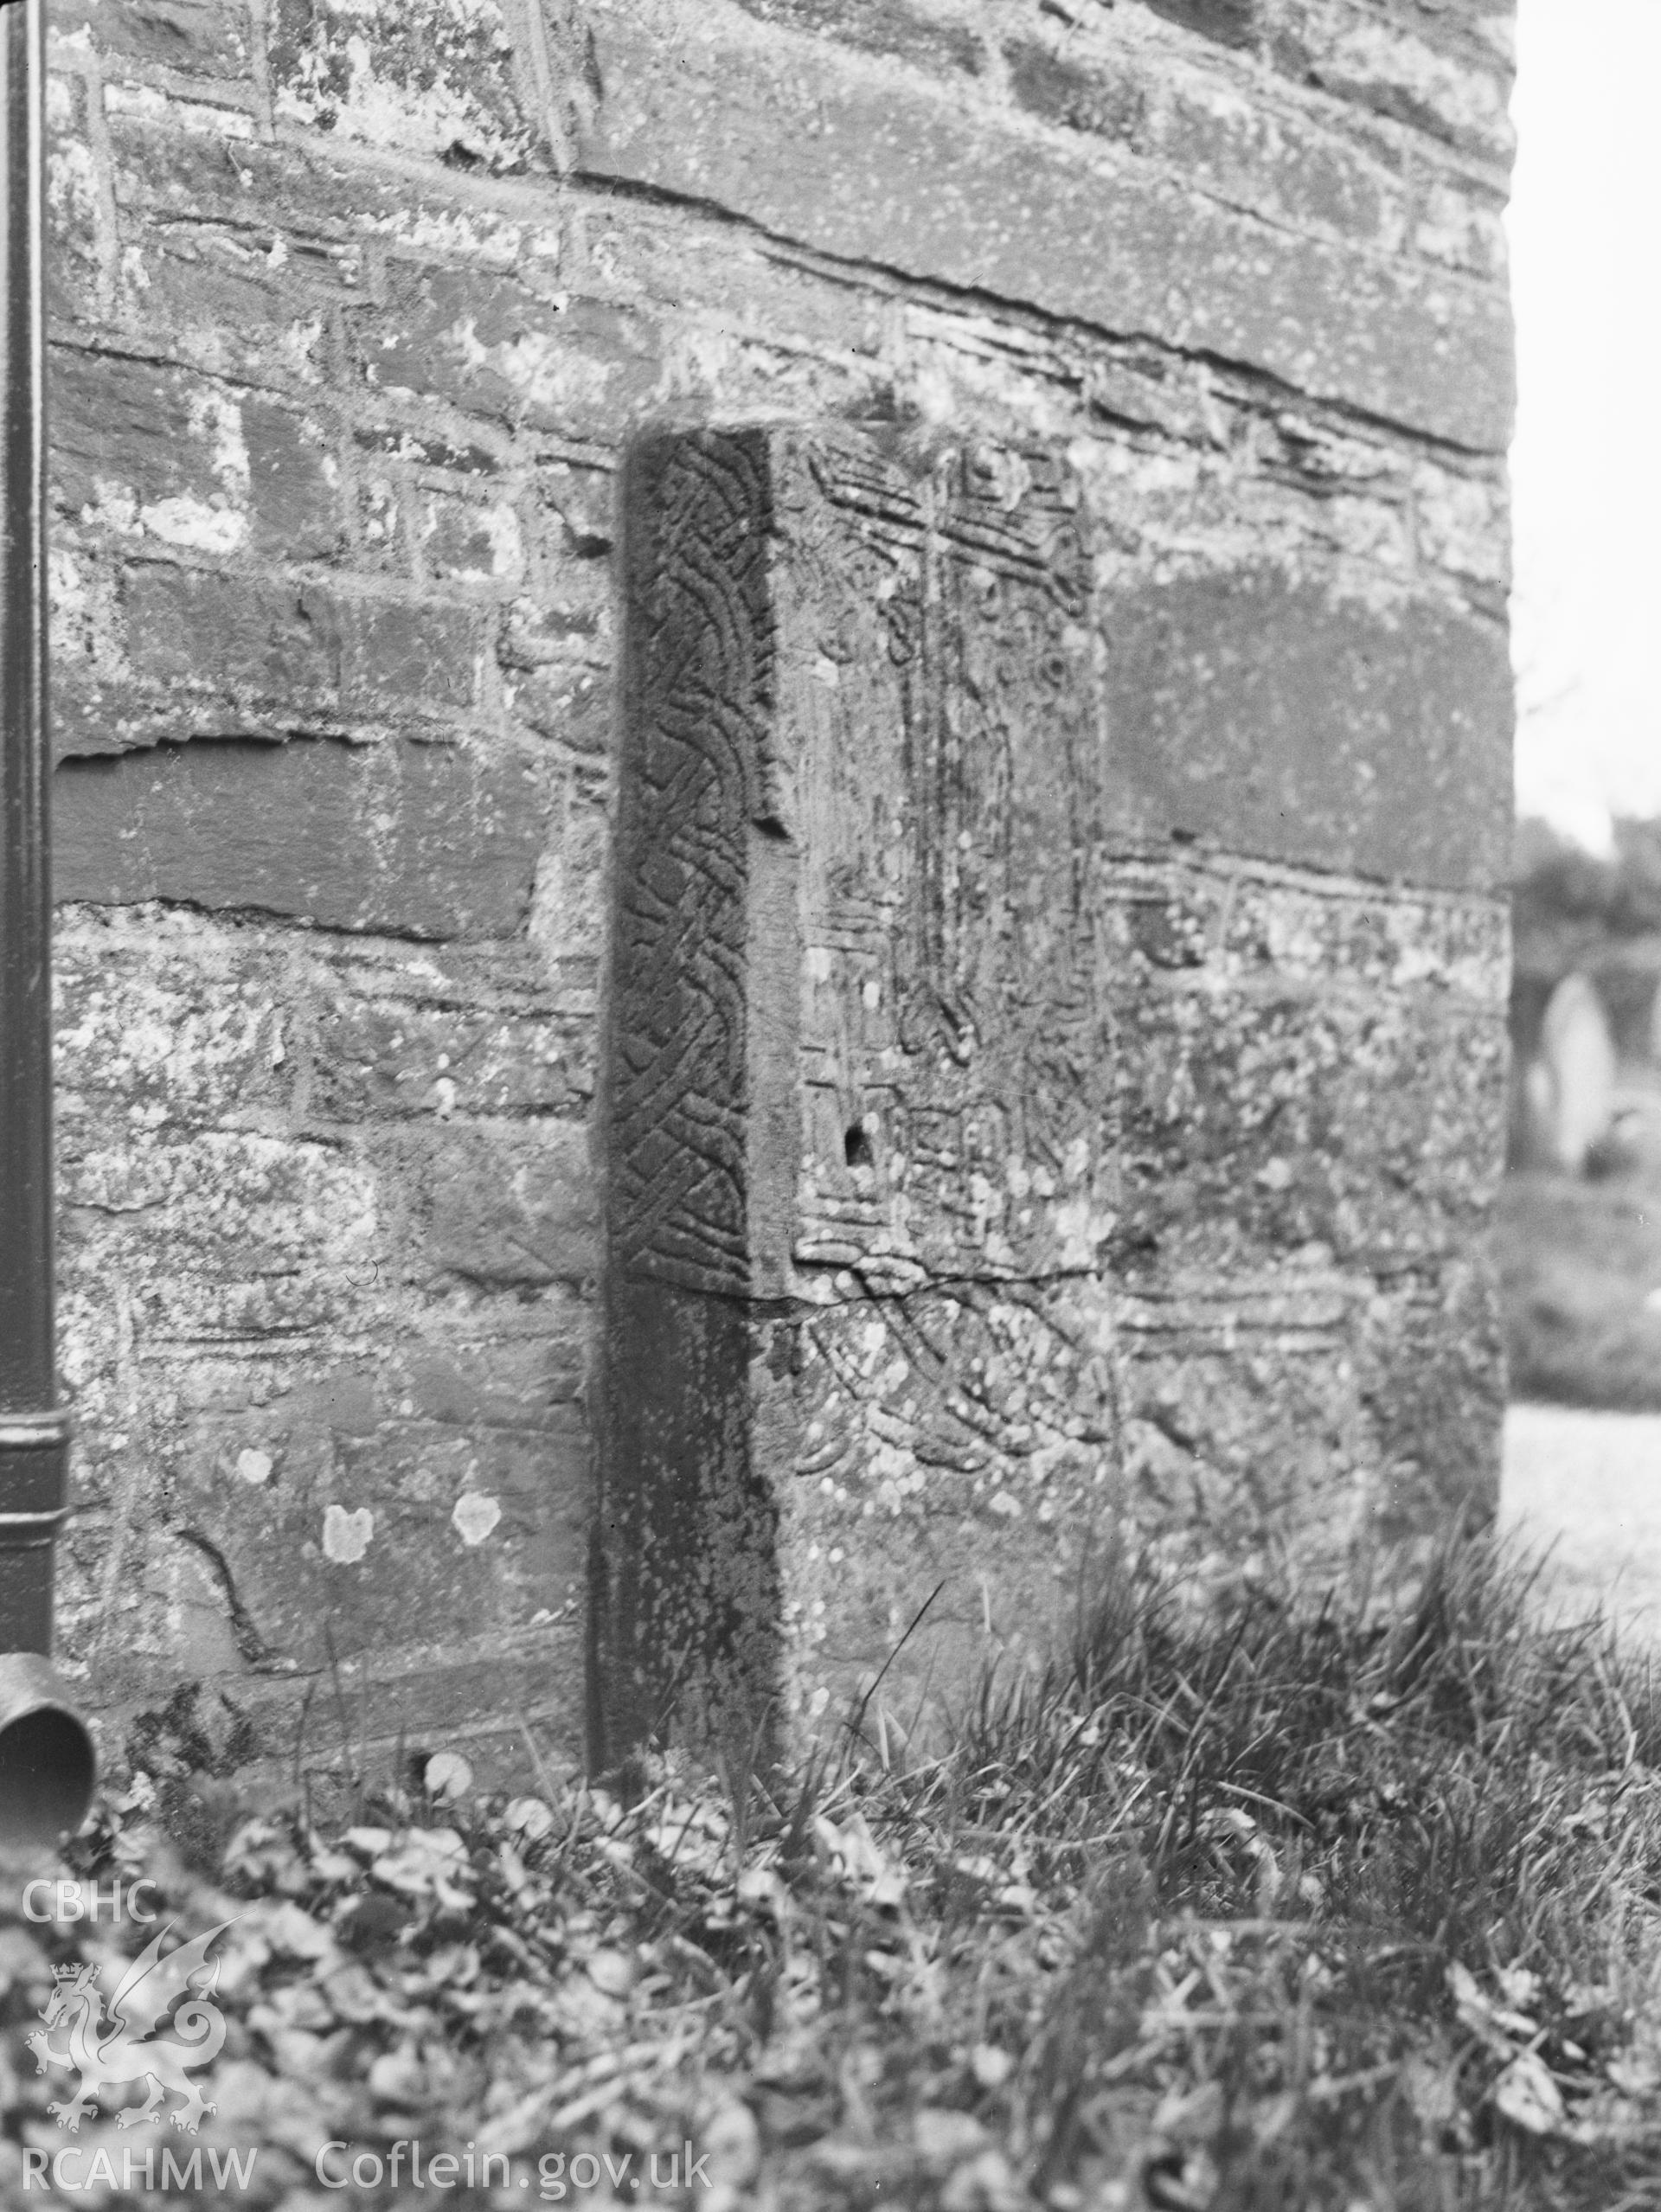 Digital copy of a nitrate negative showing exterior view of Cross-slab outside the wall of Llanhamlach Church.  The stone was taken inside the church. From the National Building Record Postcard Collection.